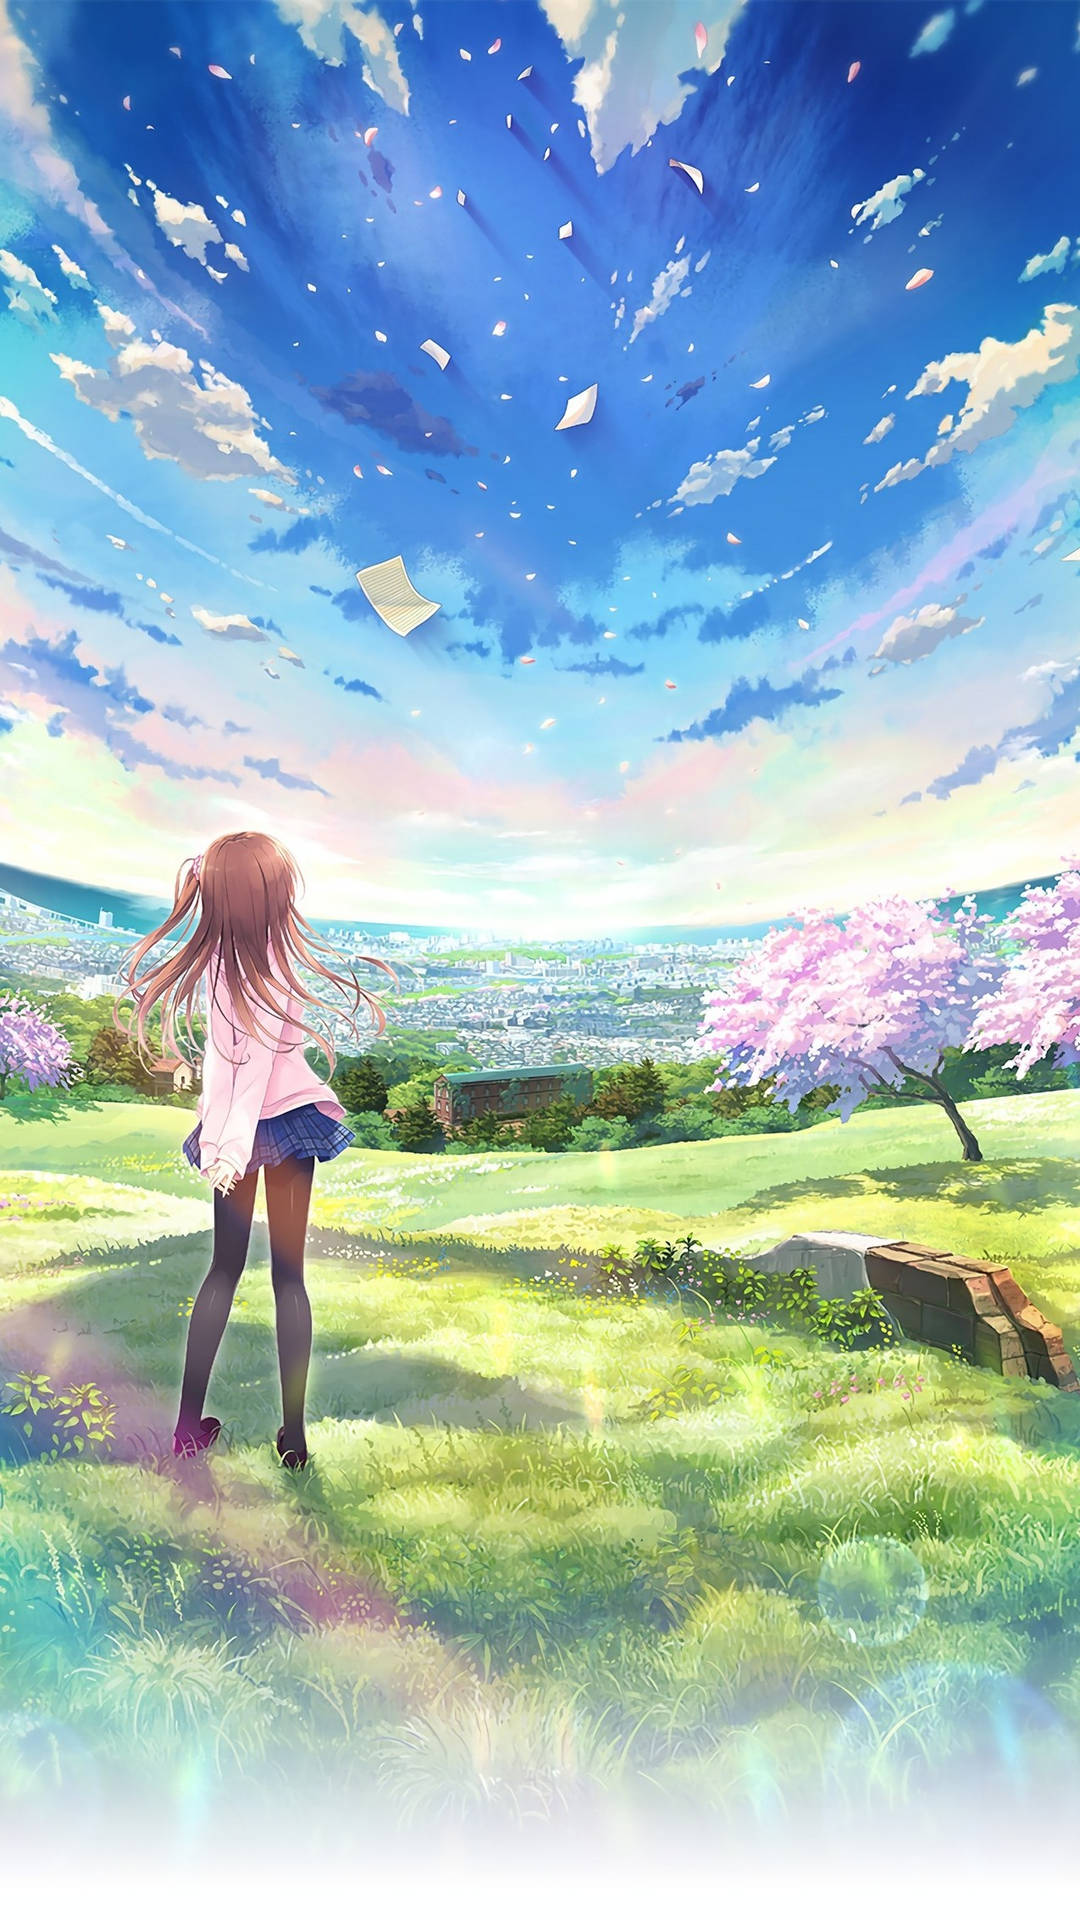 Beautiful Anime Girl With Cherry Blossom Background